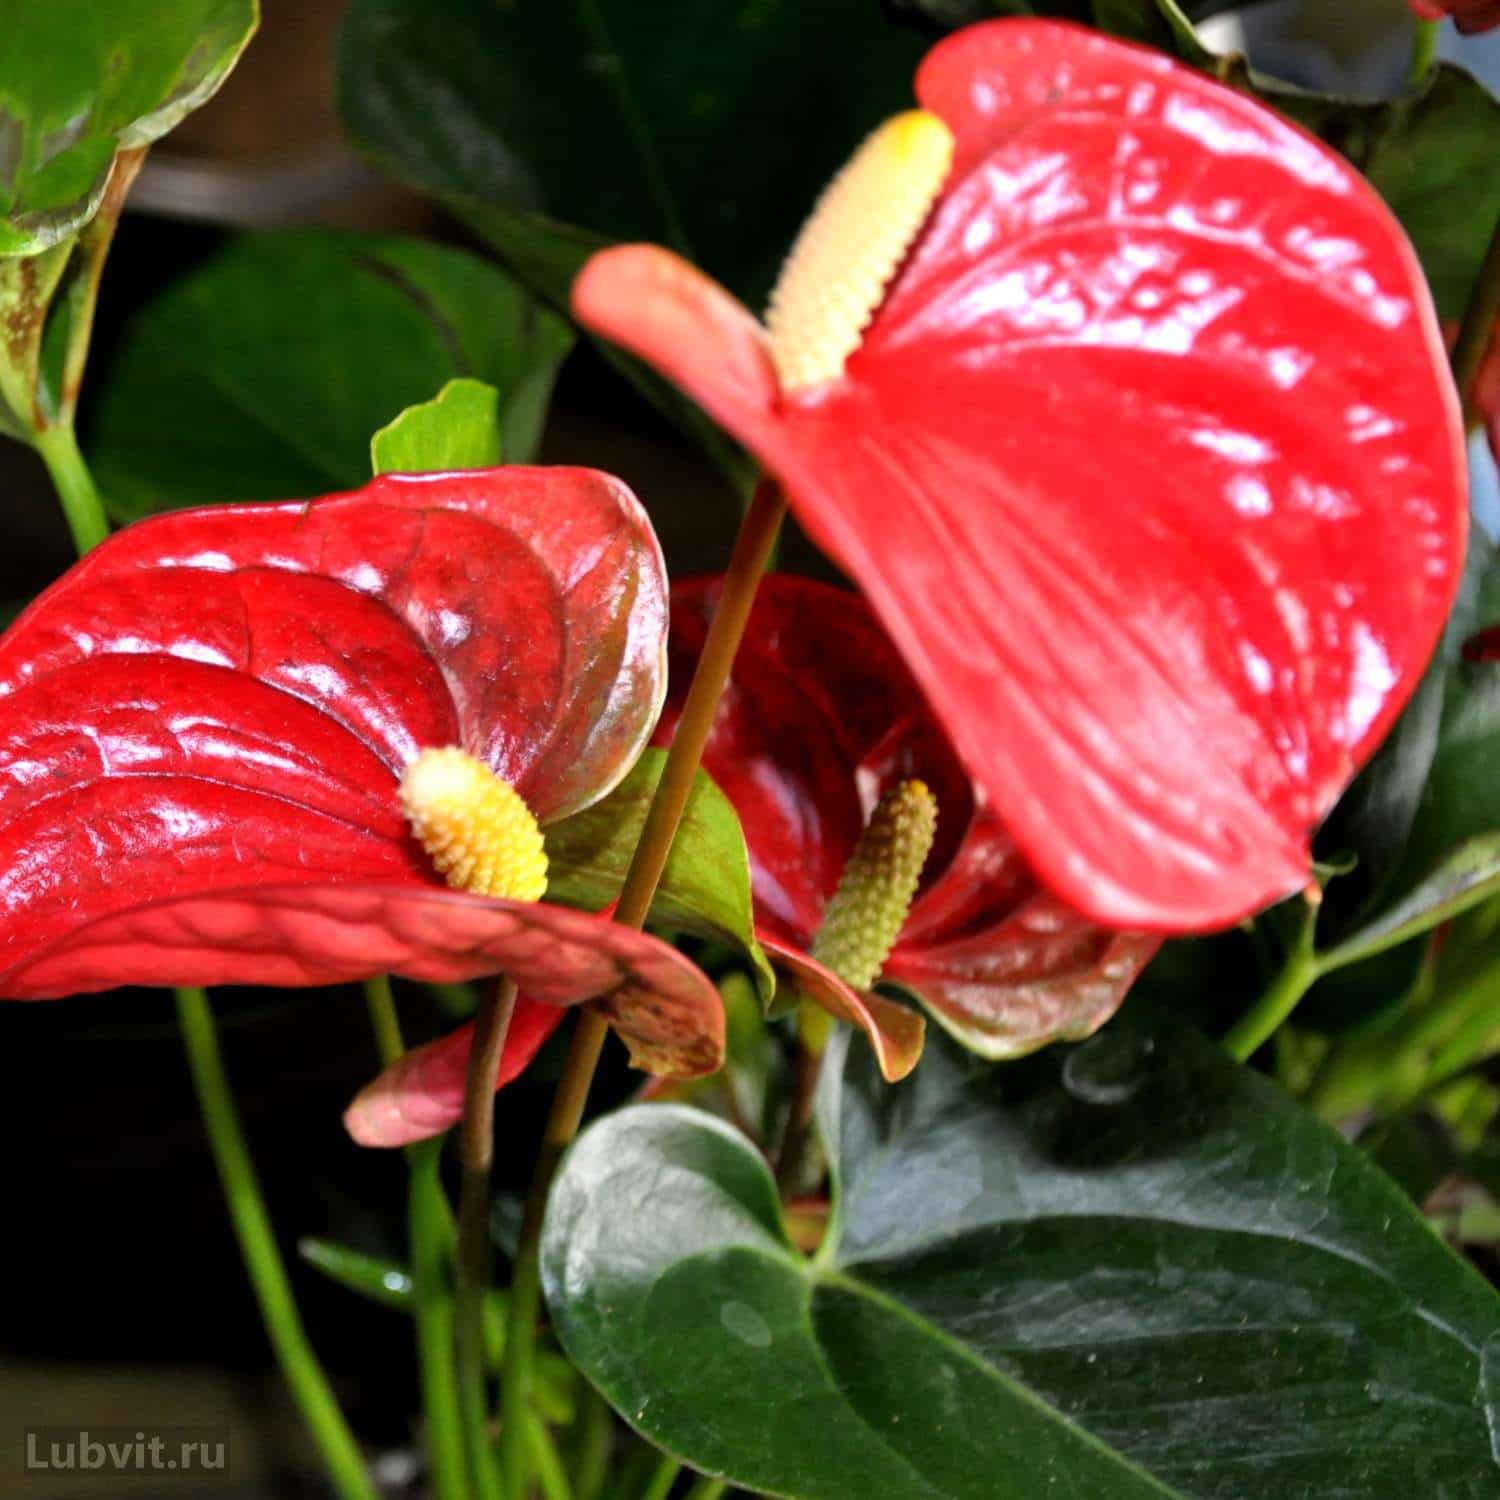 Leaves diseases of Anthurium care of plants Photo and